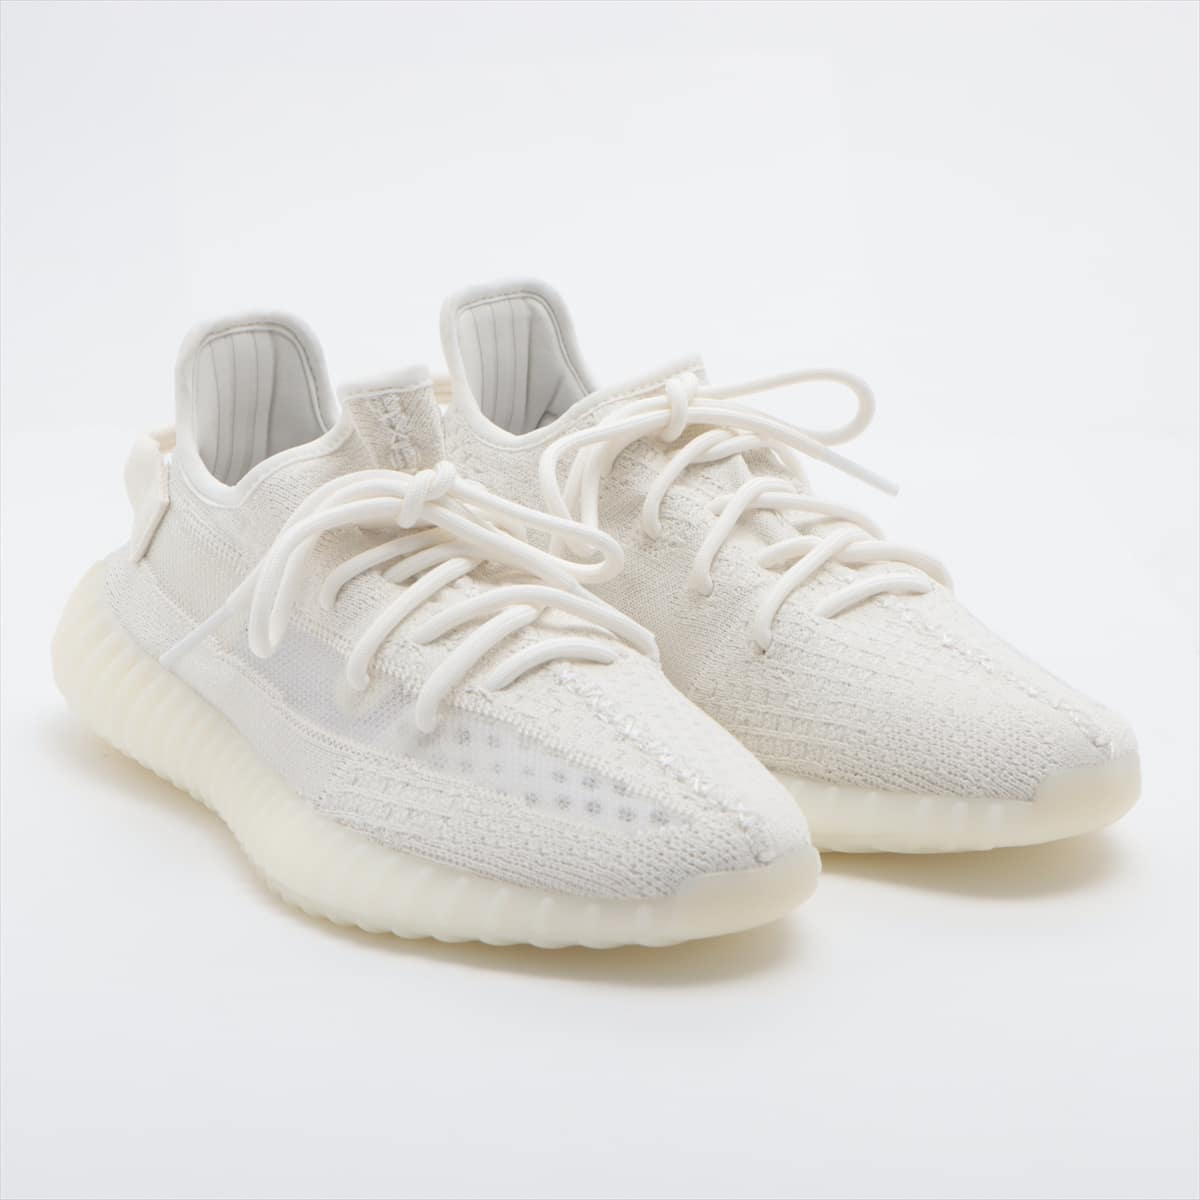 adidas x Kanye West YEEZY BOOST 350 V2 Knit Sneakers 26㎝ Men's White Pure Oat Bone HQ6316